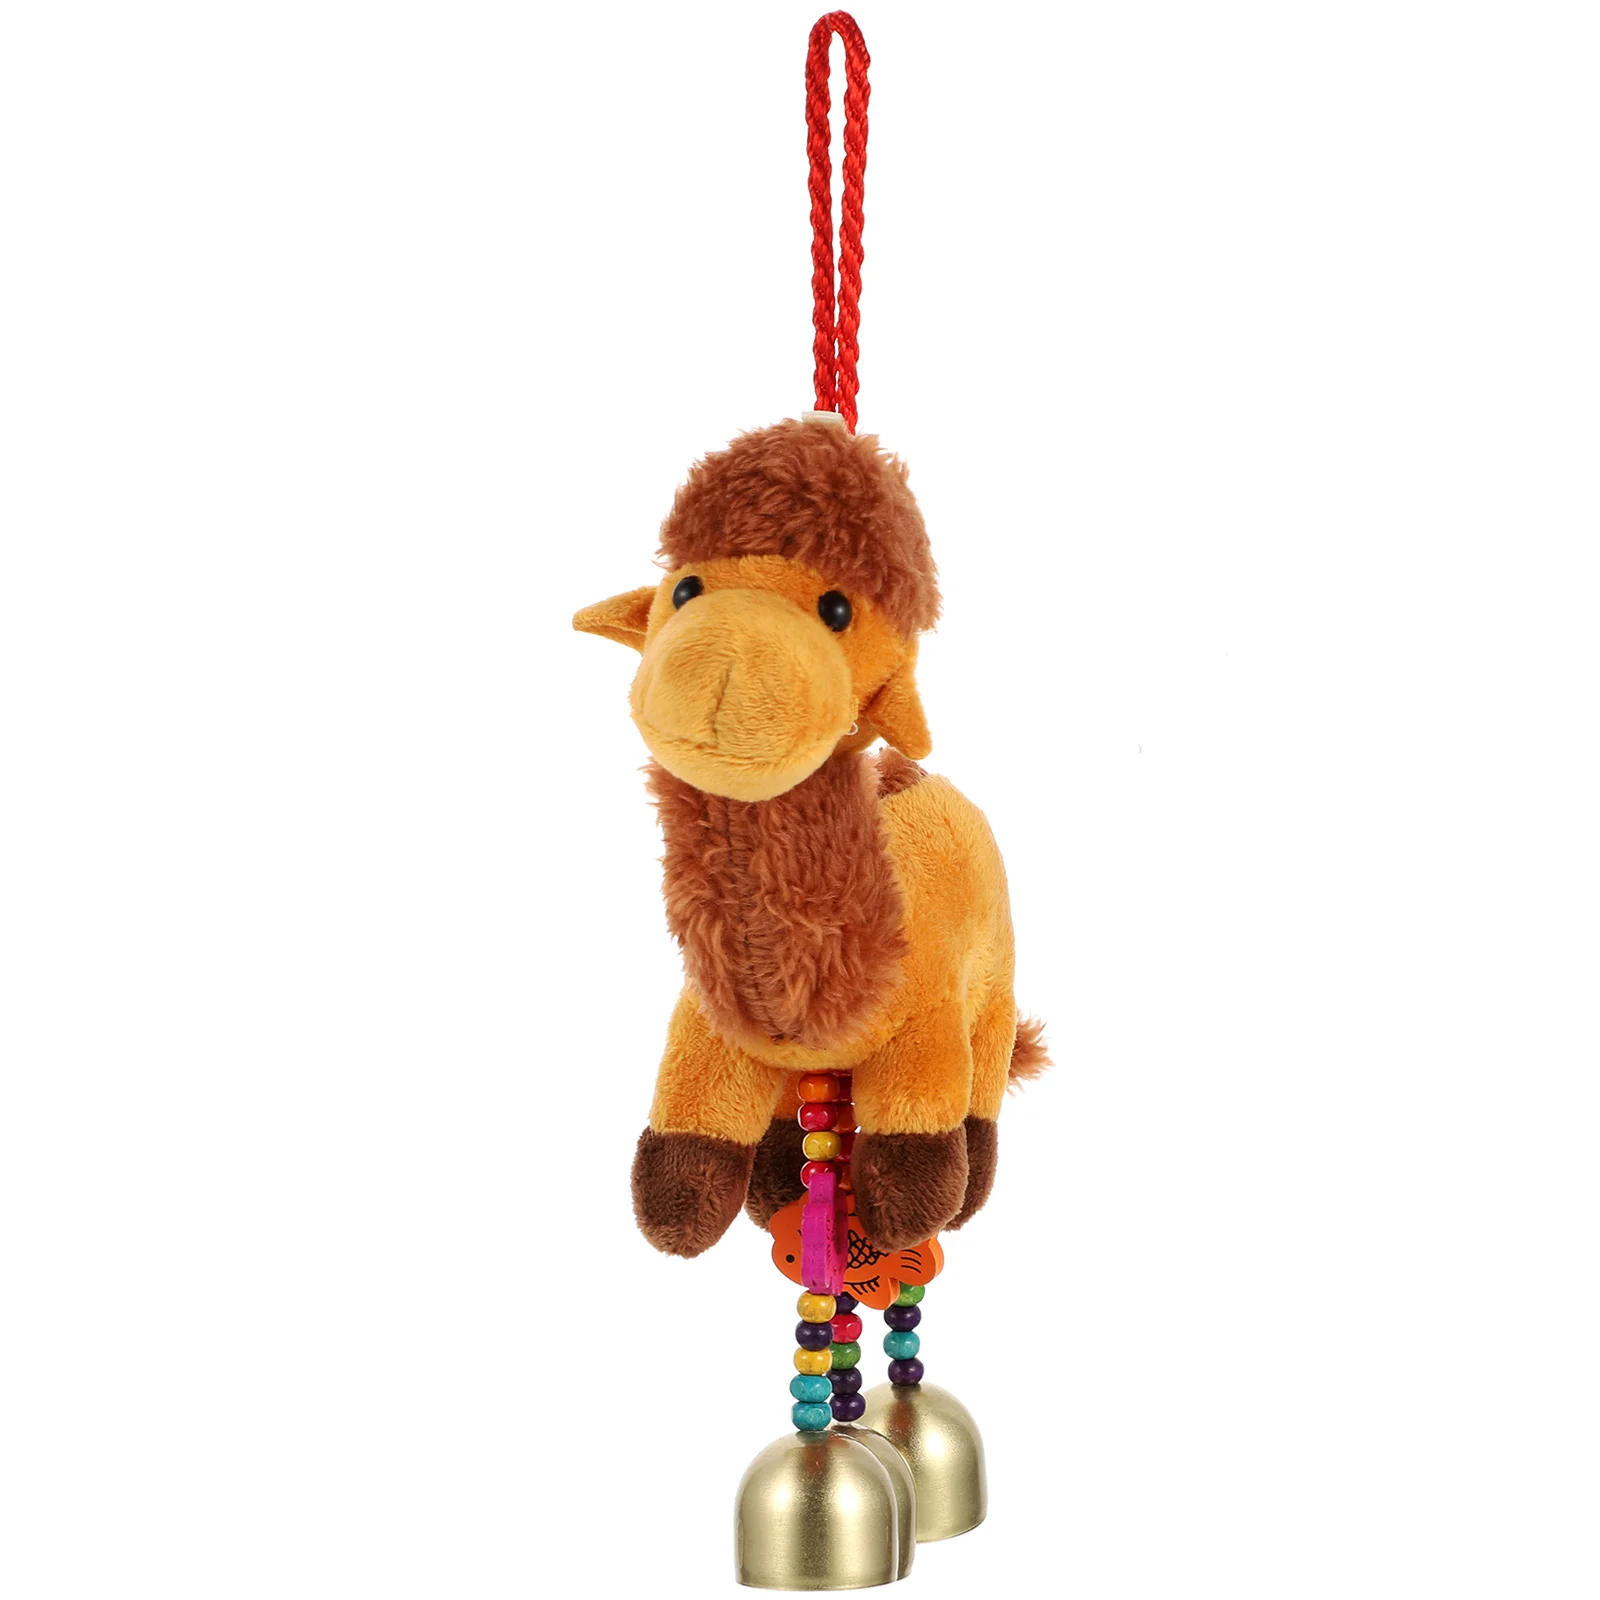 Camel Child Toys Keyring Bag Pendant Mini Kids Party Favors Metal Plush Keychains Aesthetic Childrens keychains volleyball party bag hanging pendants key chains volleyball party favors